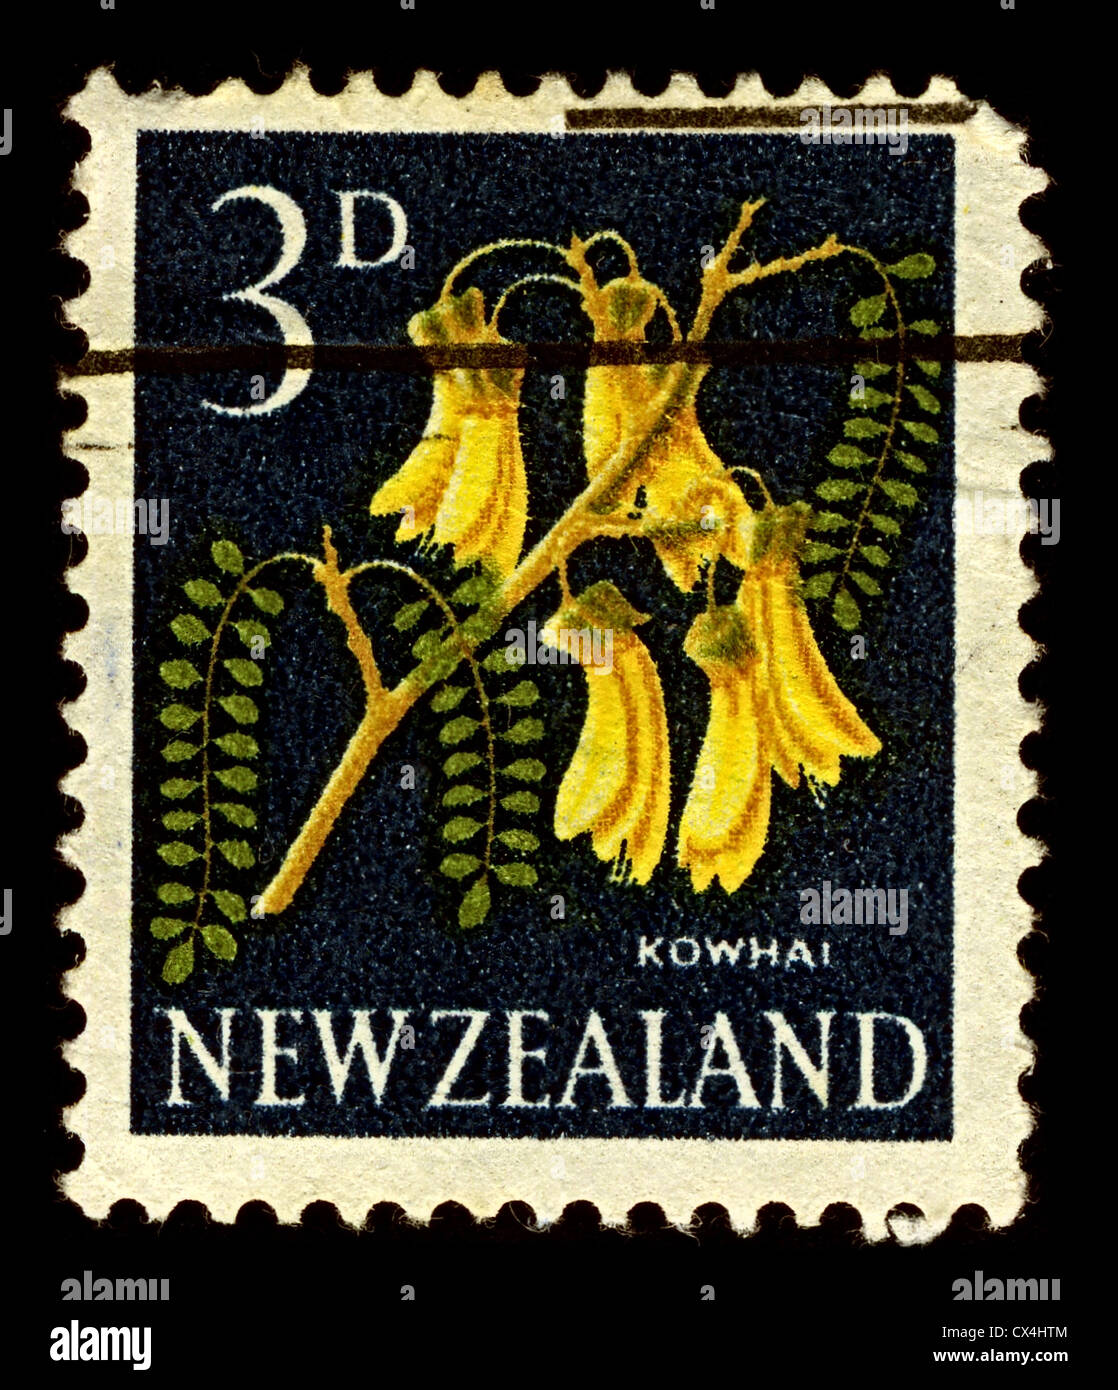 NEW ZEALAND-CIRCA 1960:A stamp printed in NEW ZEALAND shows image of Kowhai are small, woody legume trees in the genus Sophora. Stock Photo